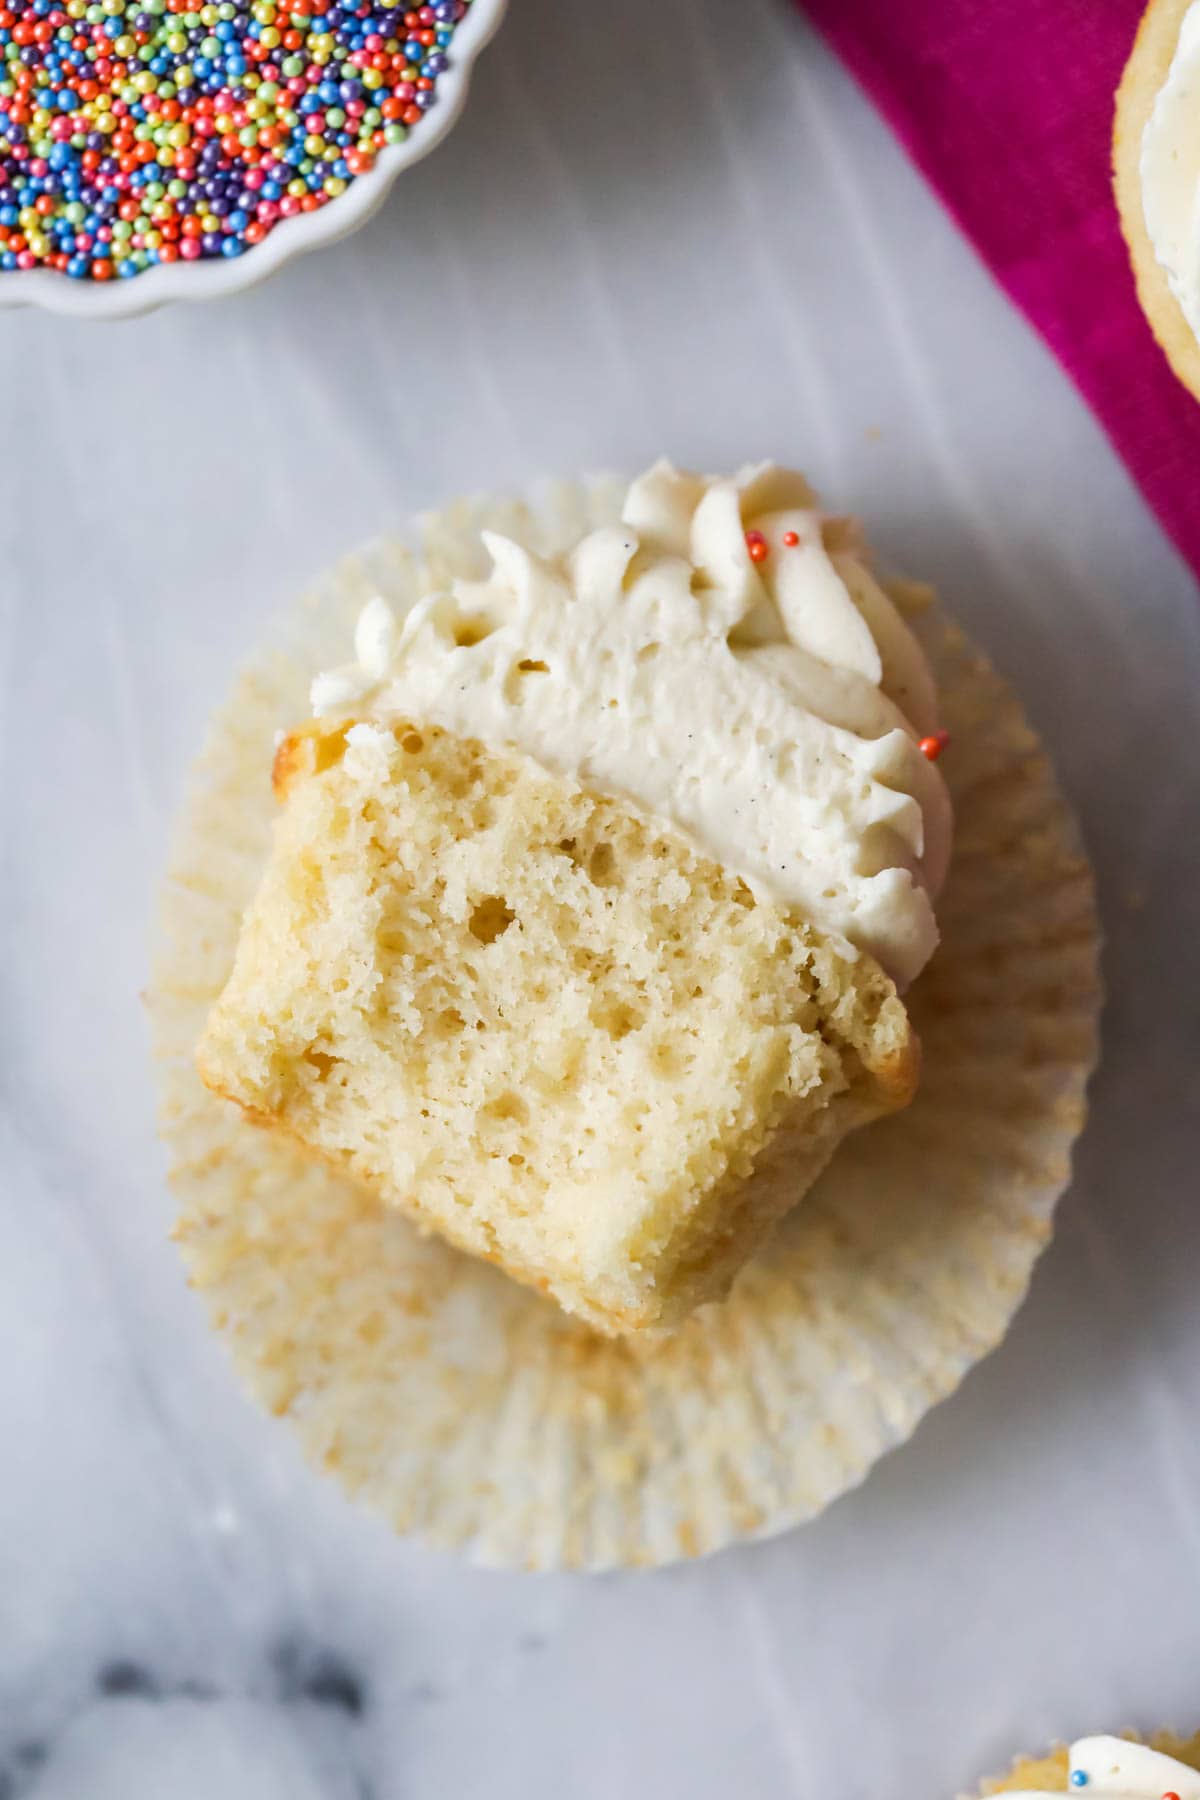 Vanilla cupcake that's been unwrapped and cut in half.